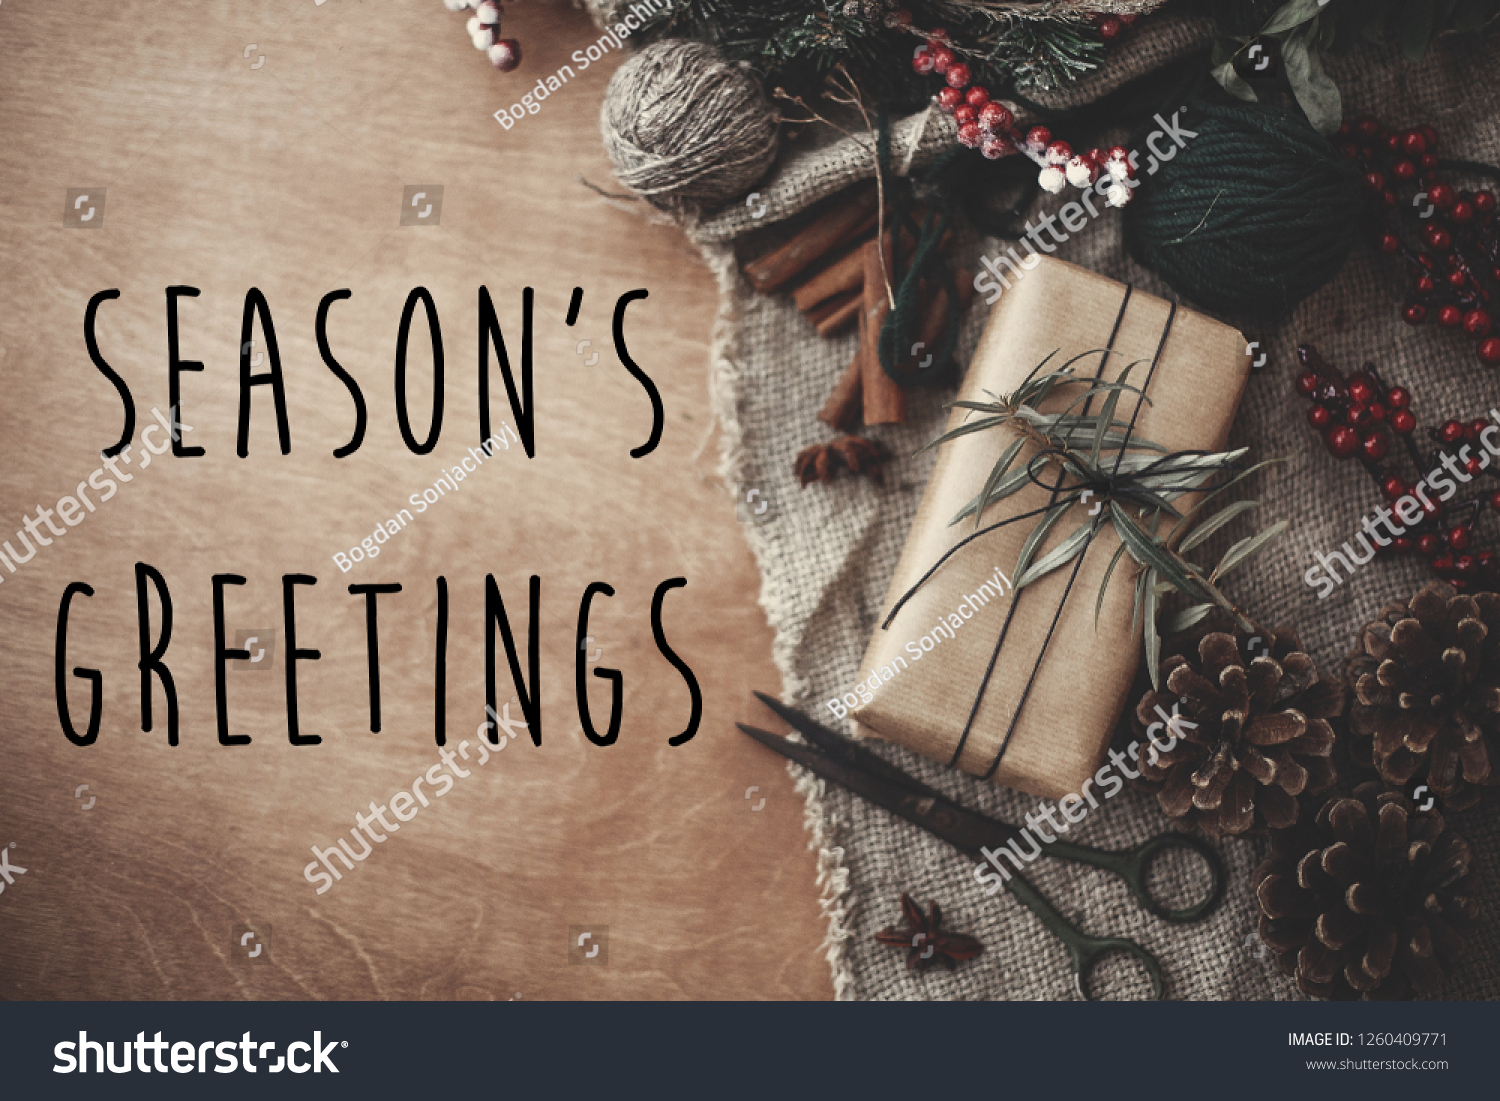 Season's greetings text sign on stylish rustic christmas gift box with fir branches, red berries, pine cones, cinnamon on rustic wood. Atmospheric image. Seasonal greeting card #1260409771